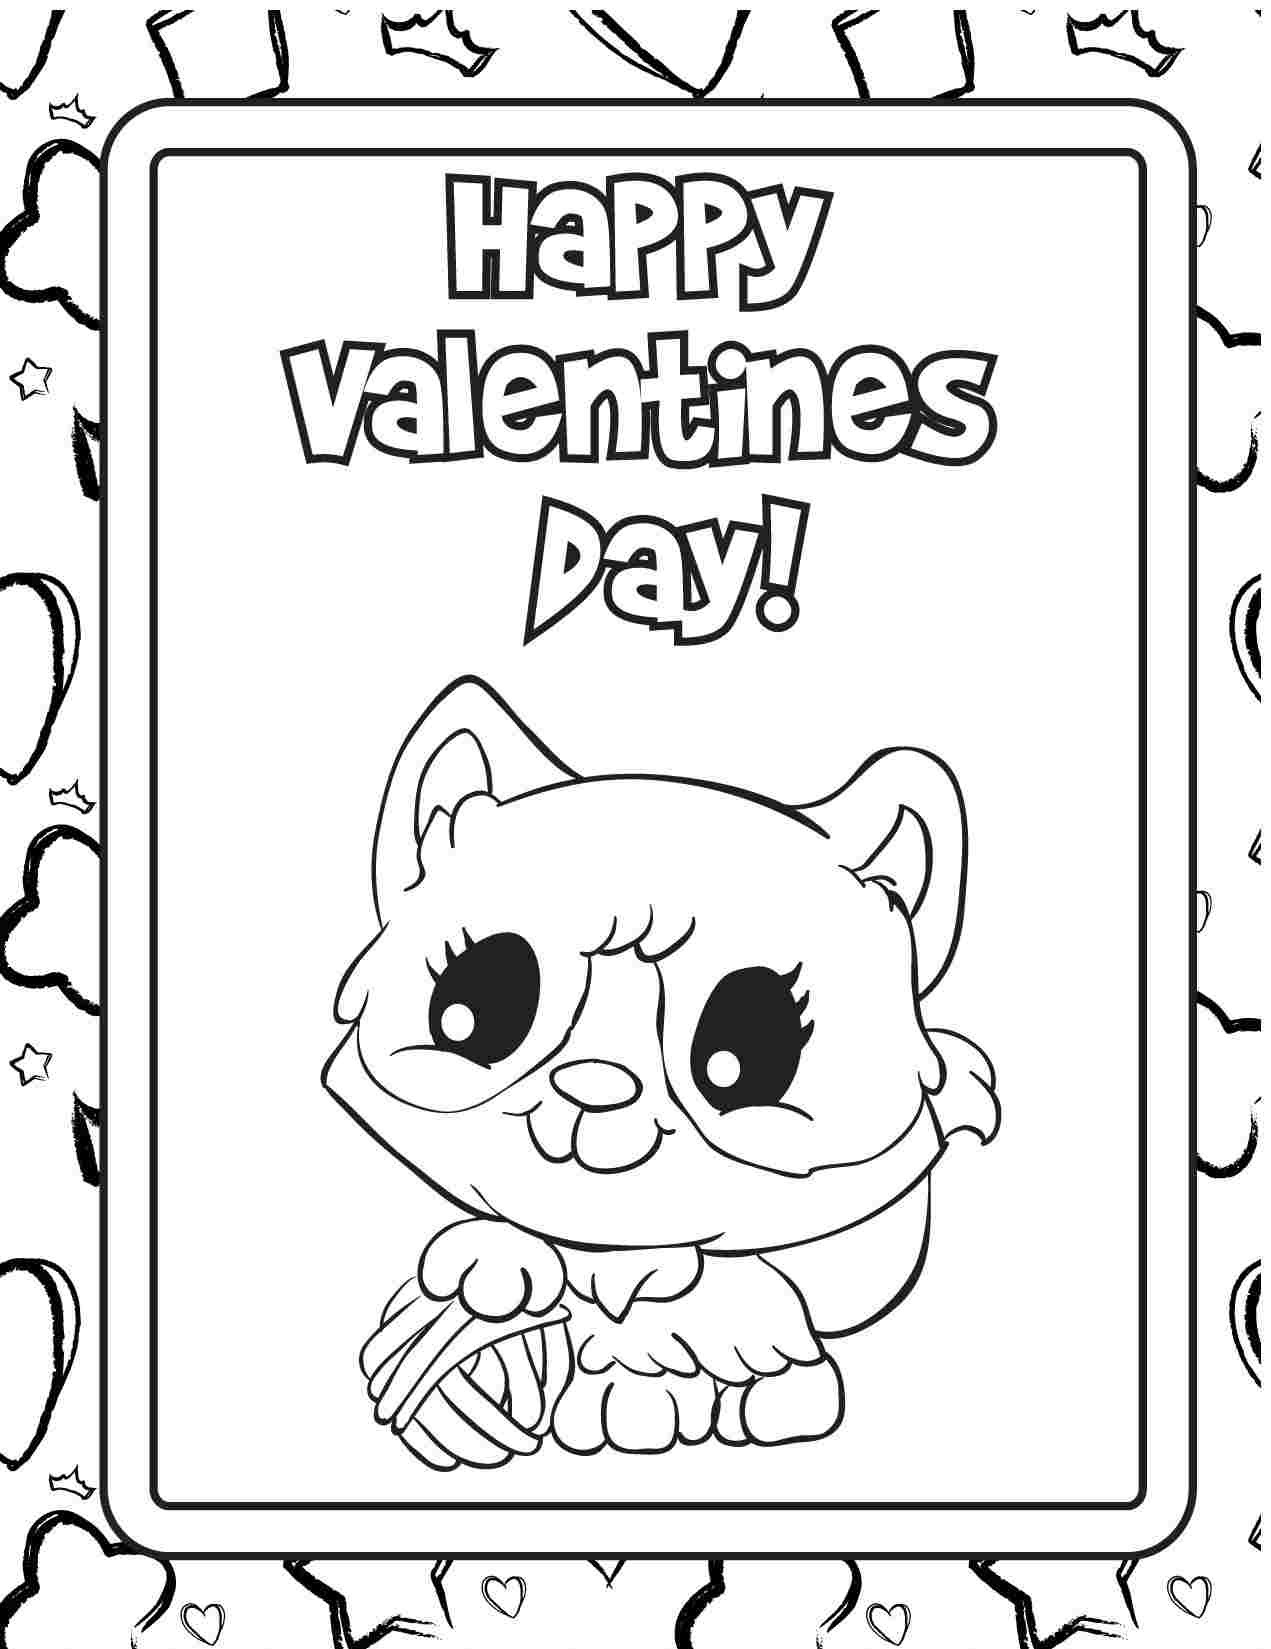 printable-valentines-day-cards-to-color